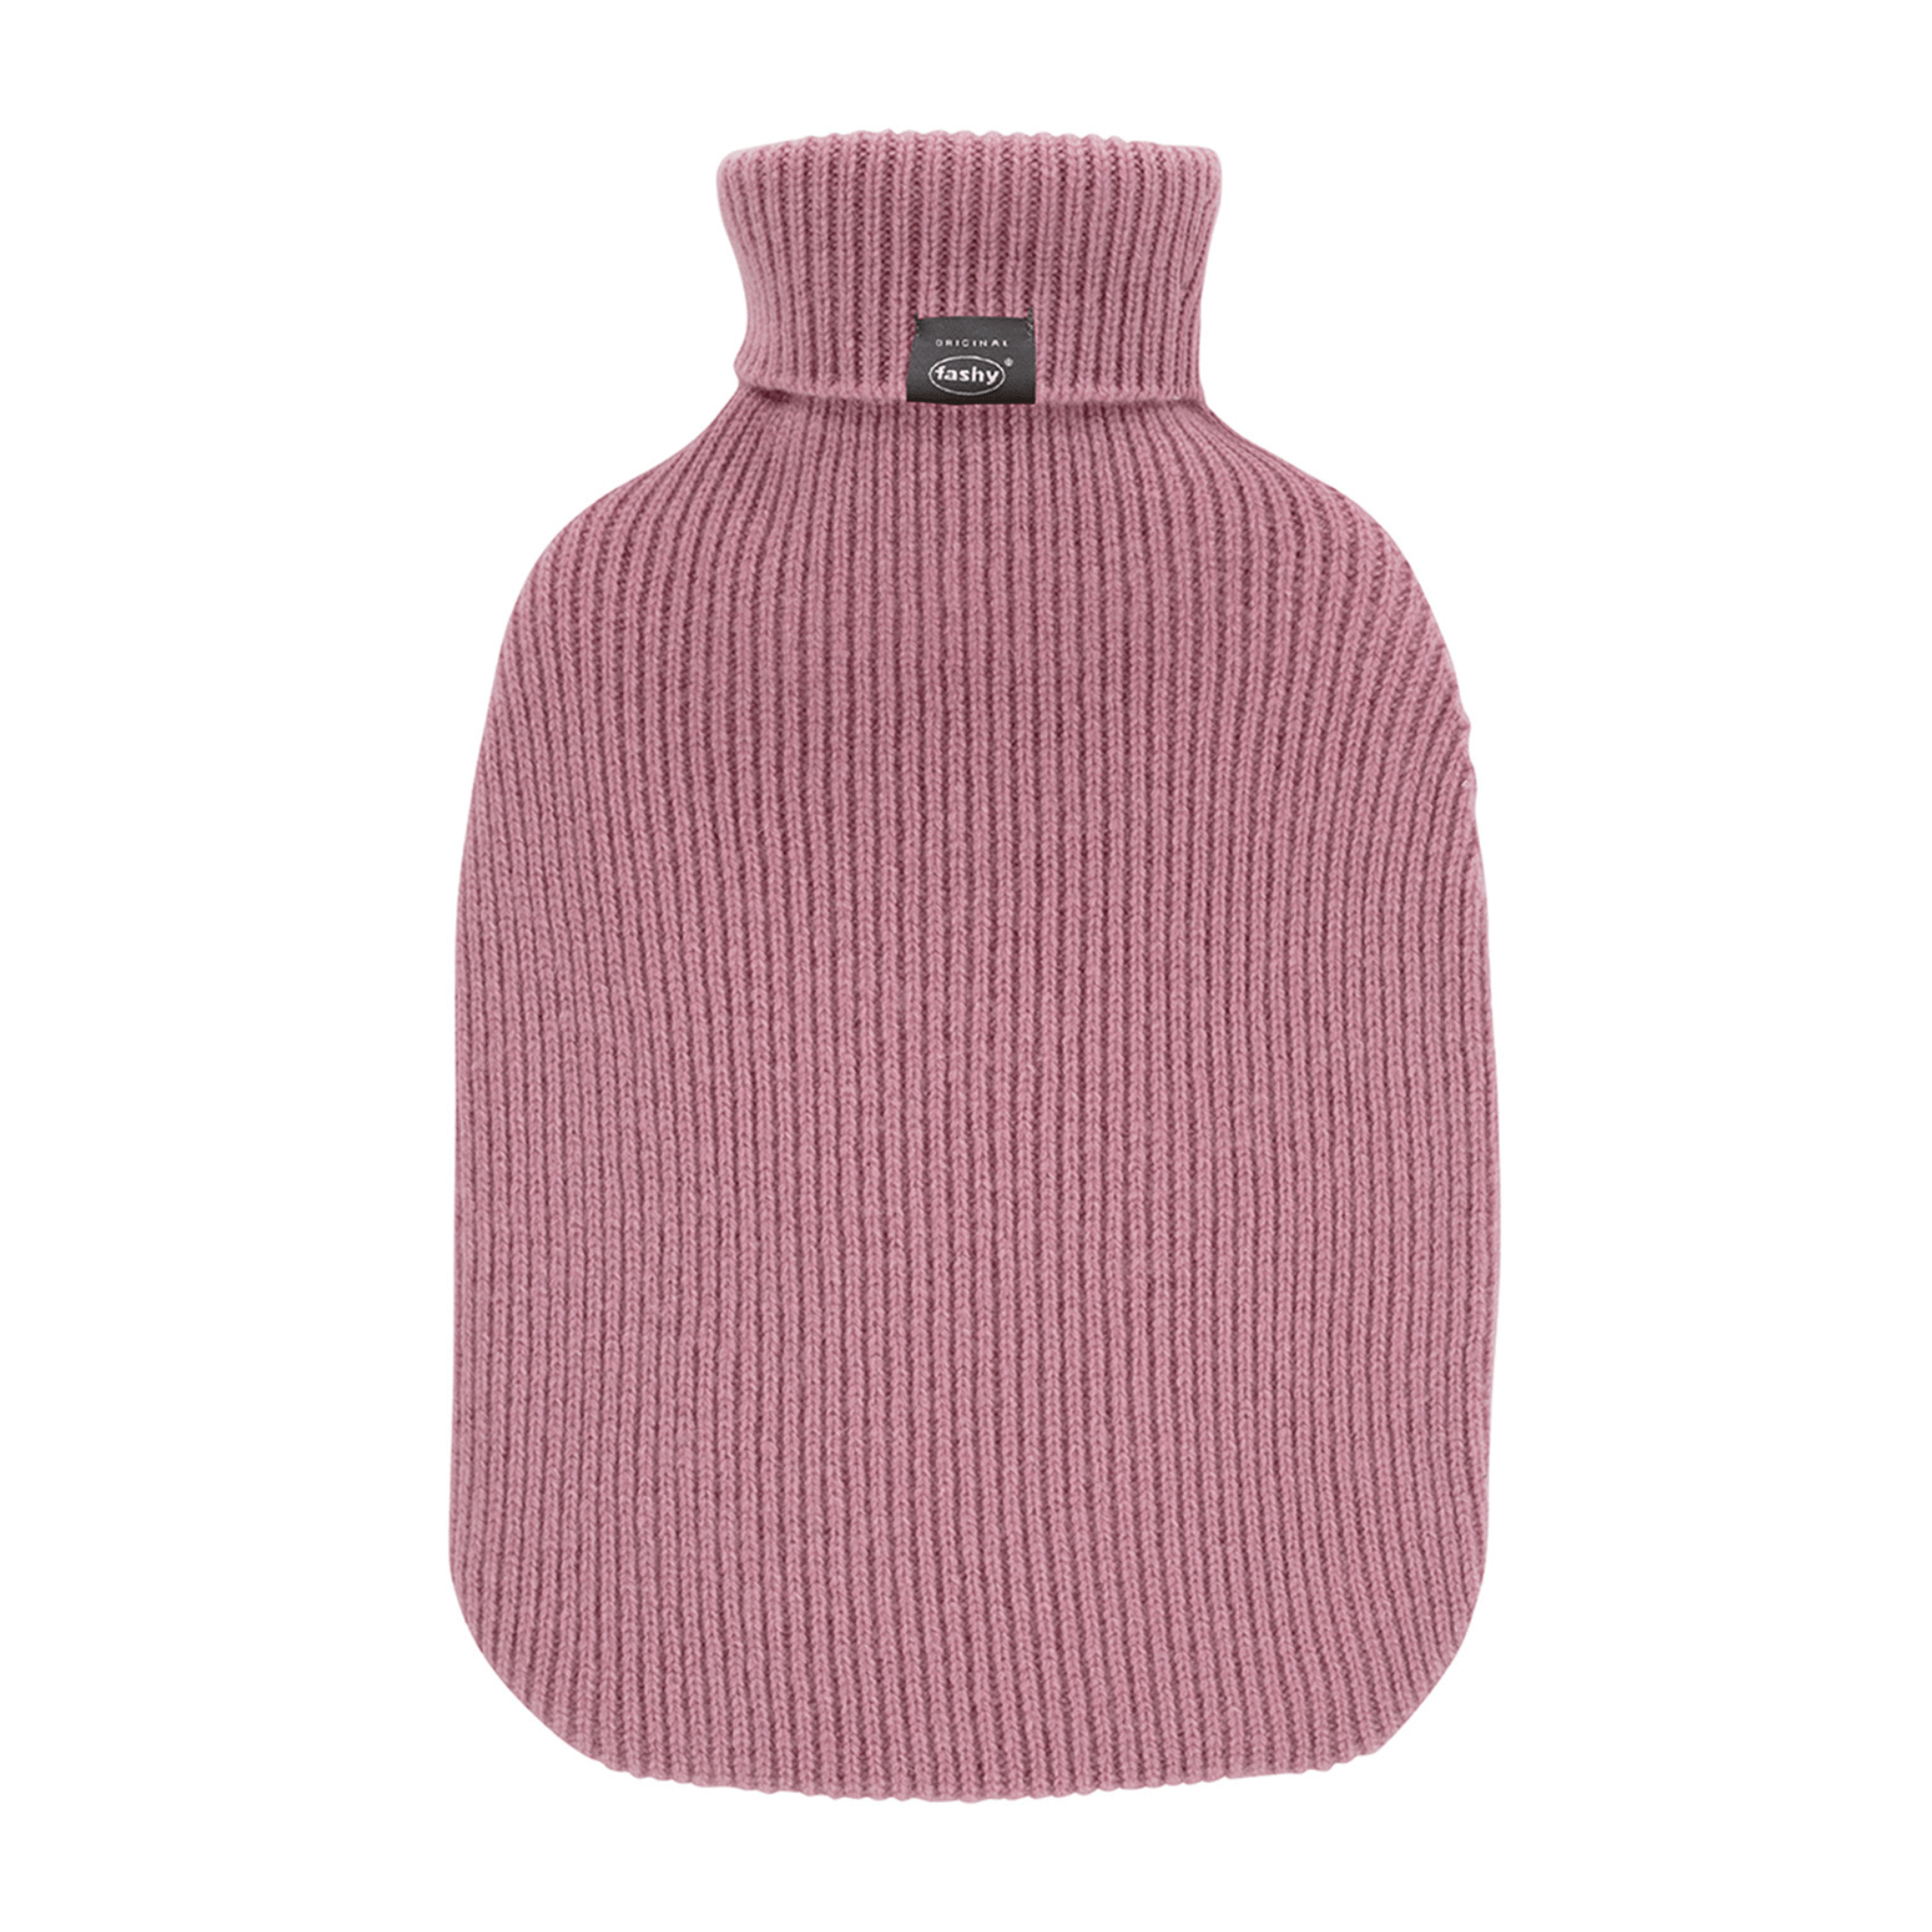 2 Litre Fashy Hot Water Bottle with Rose Pink Turtleneck Knit Cashmere Cover